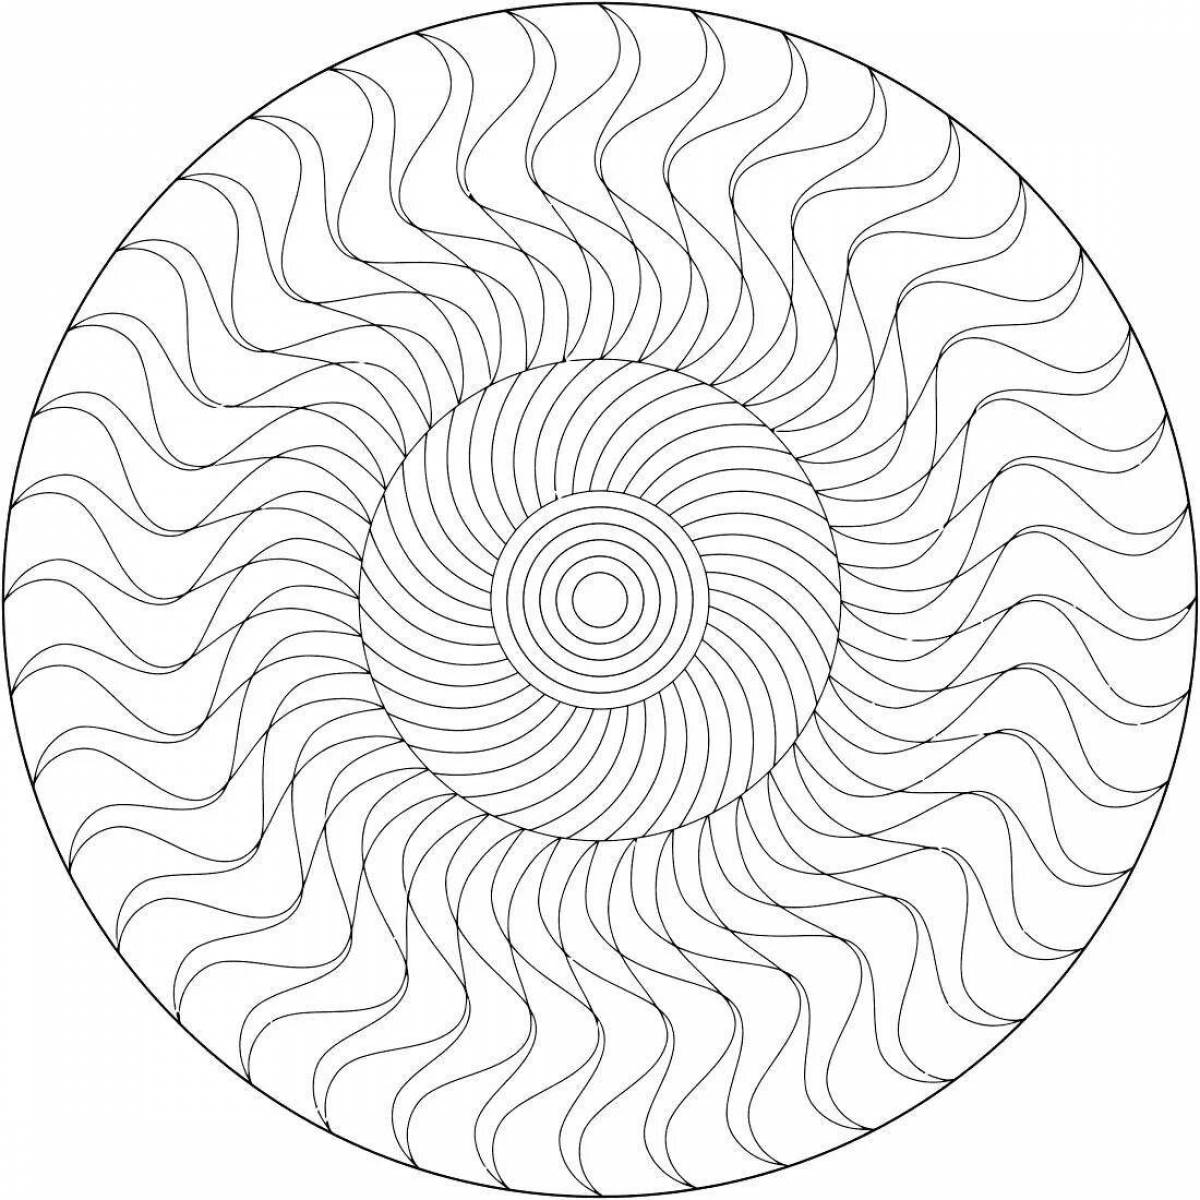 Coloring page bright spiral cat